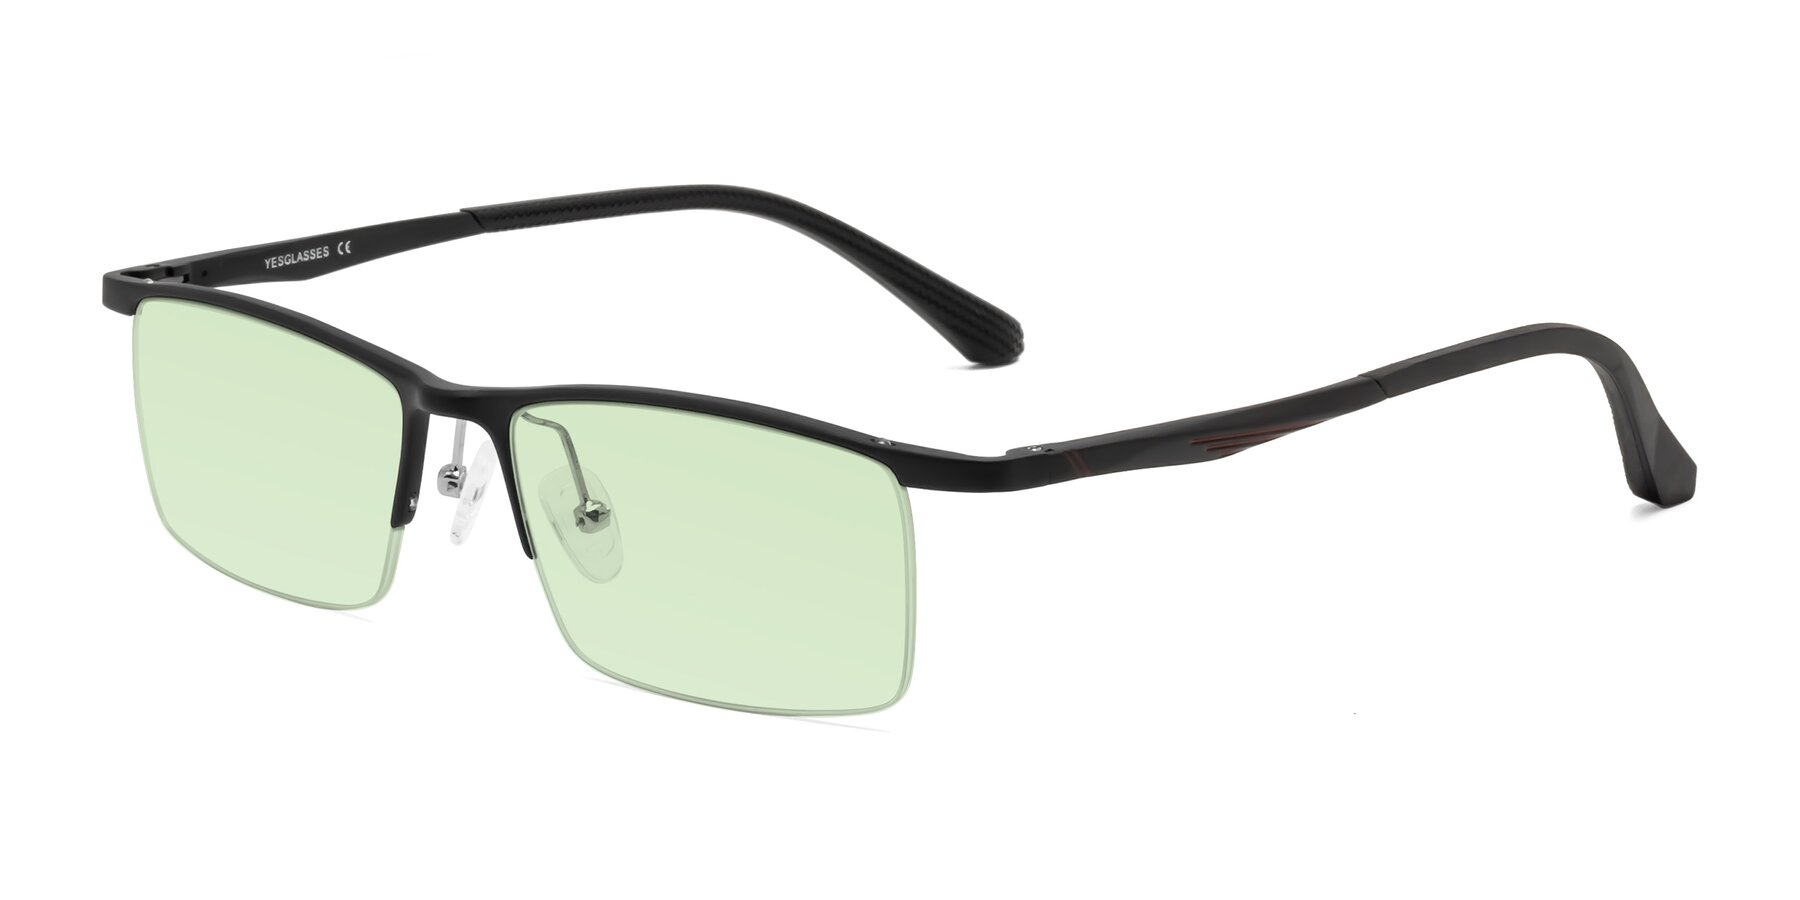 Angle of CX6236 in Black with Light Green Tinted Lenses